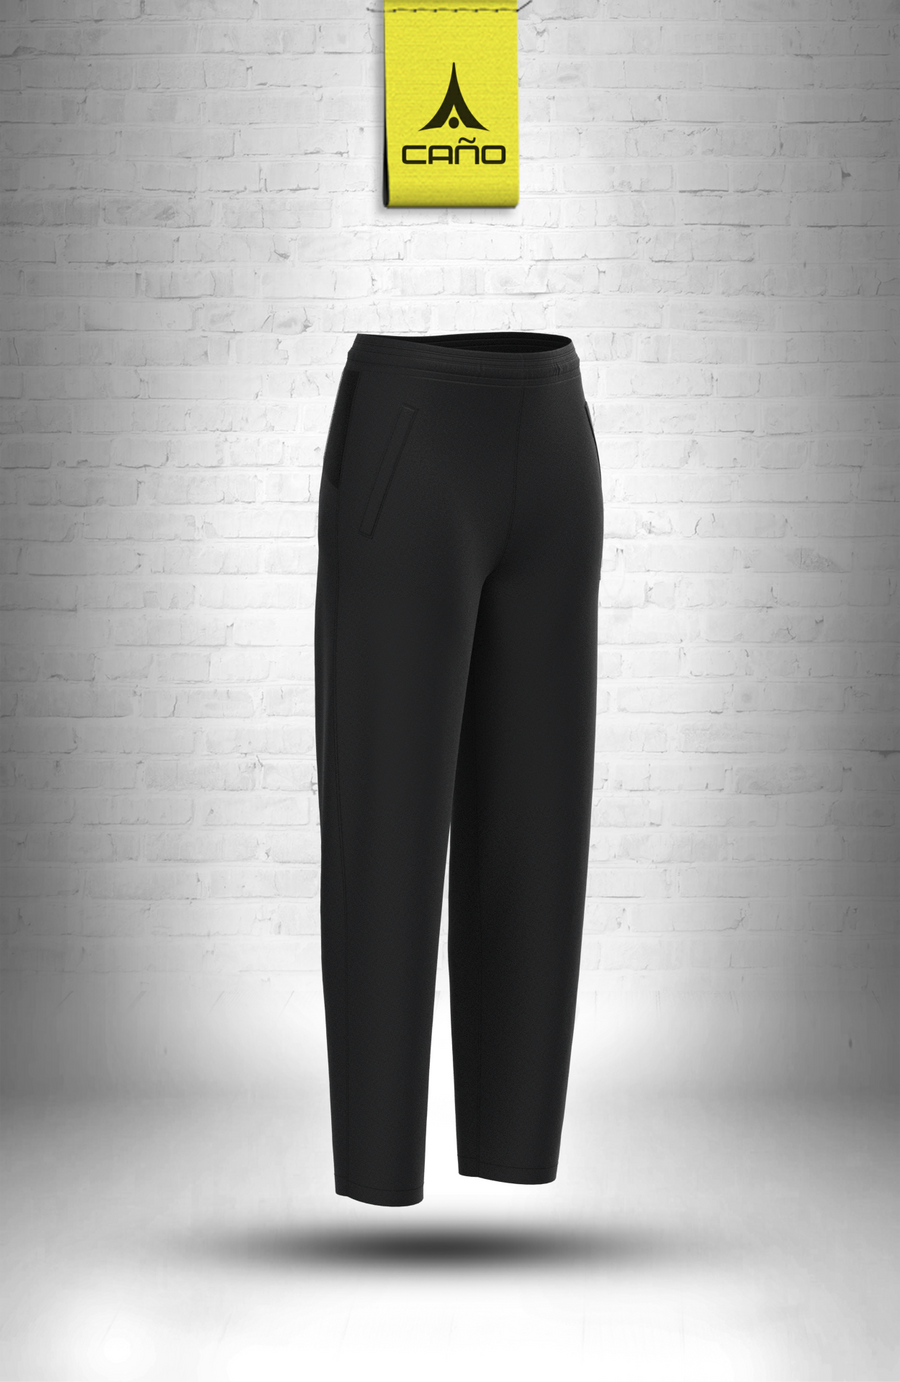 Women's Activate Thermic Pants | Jack Wolfskin